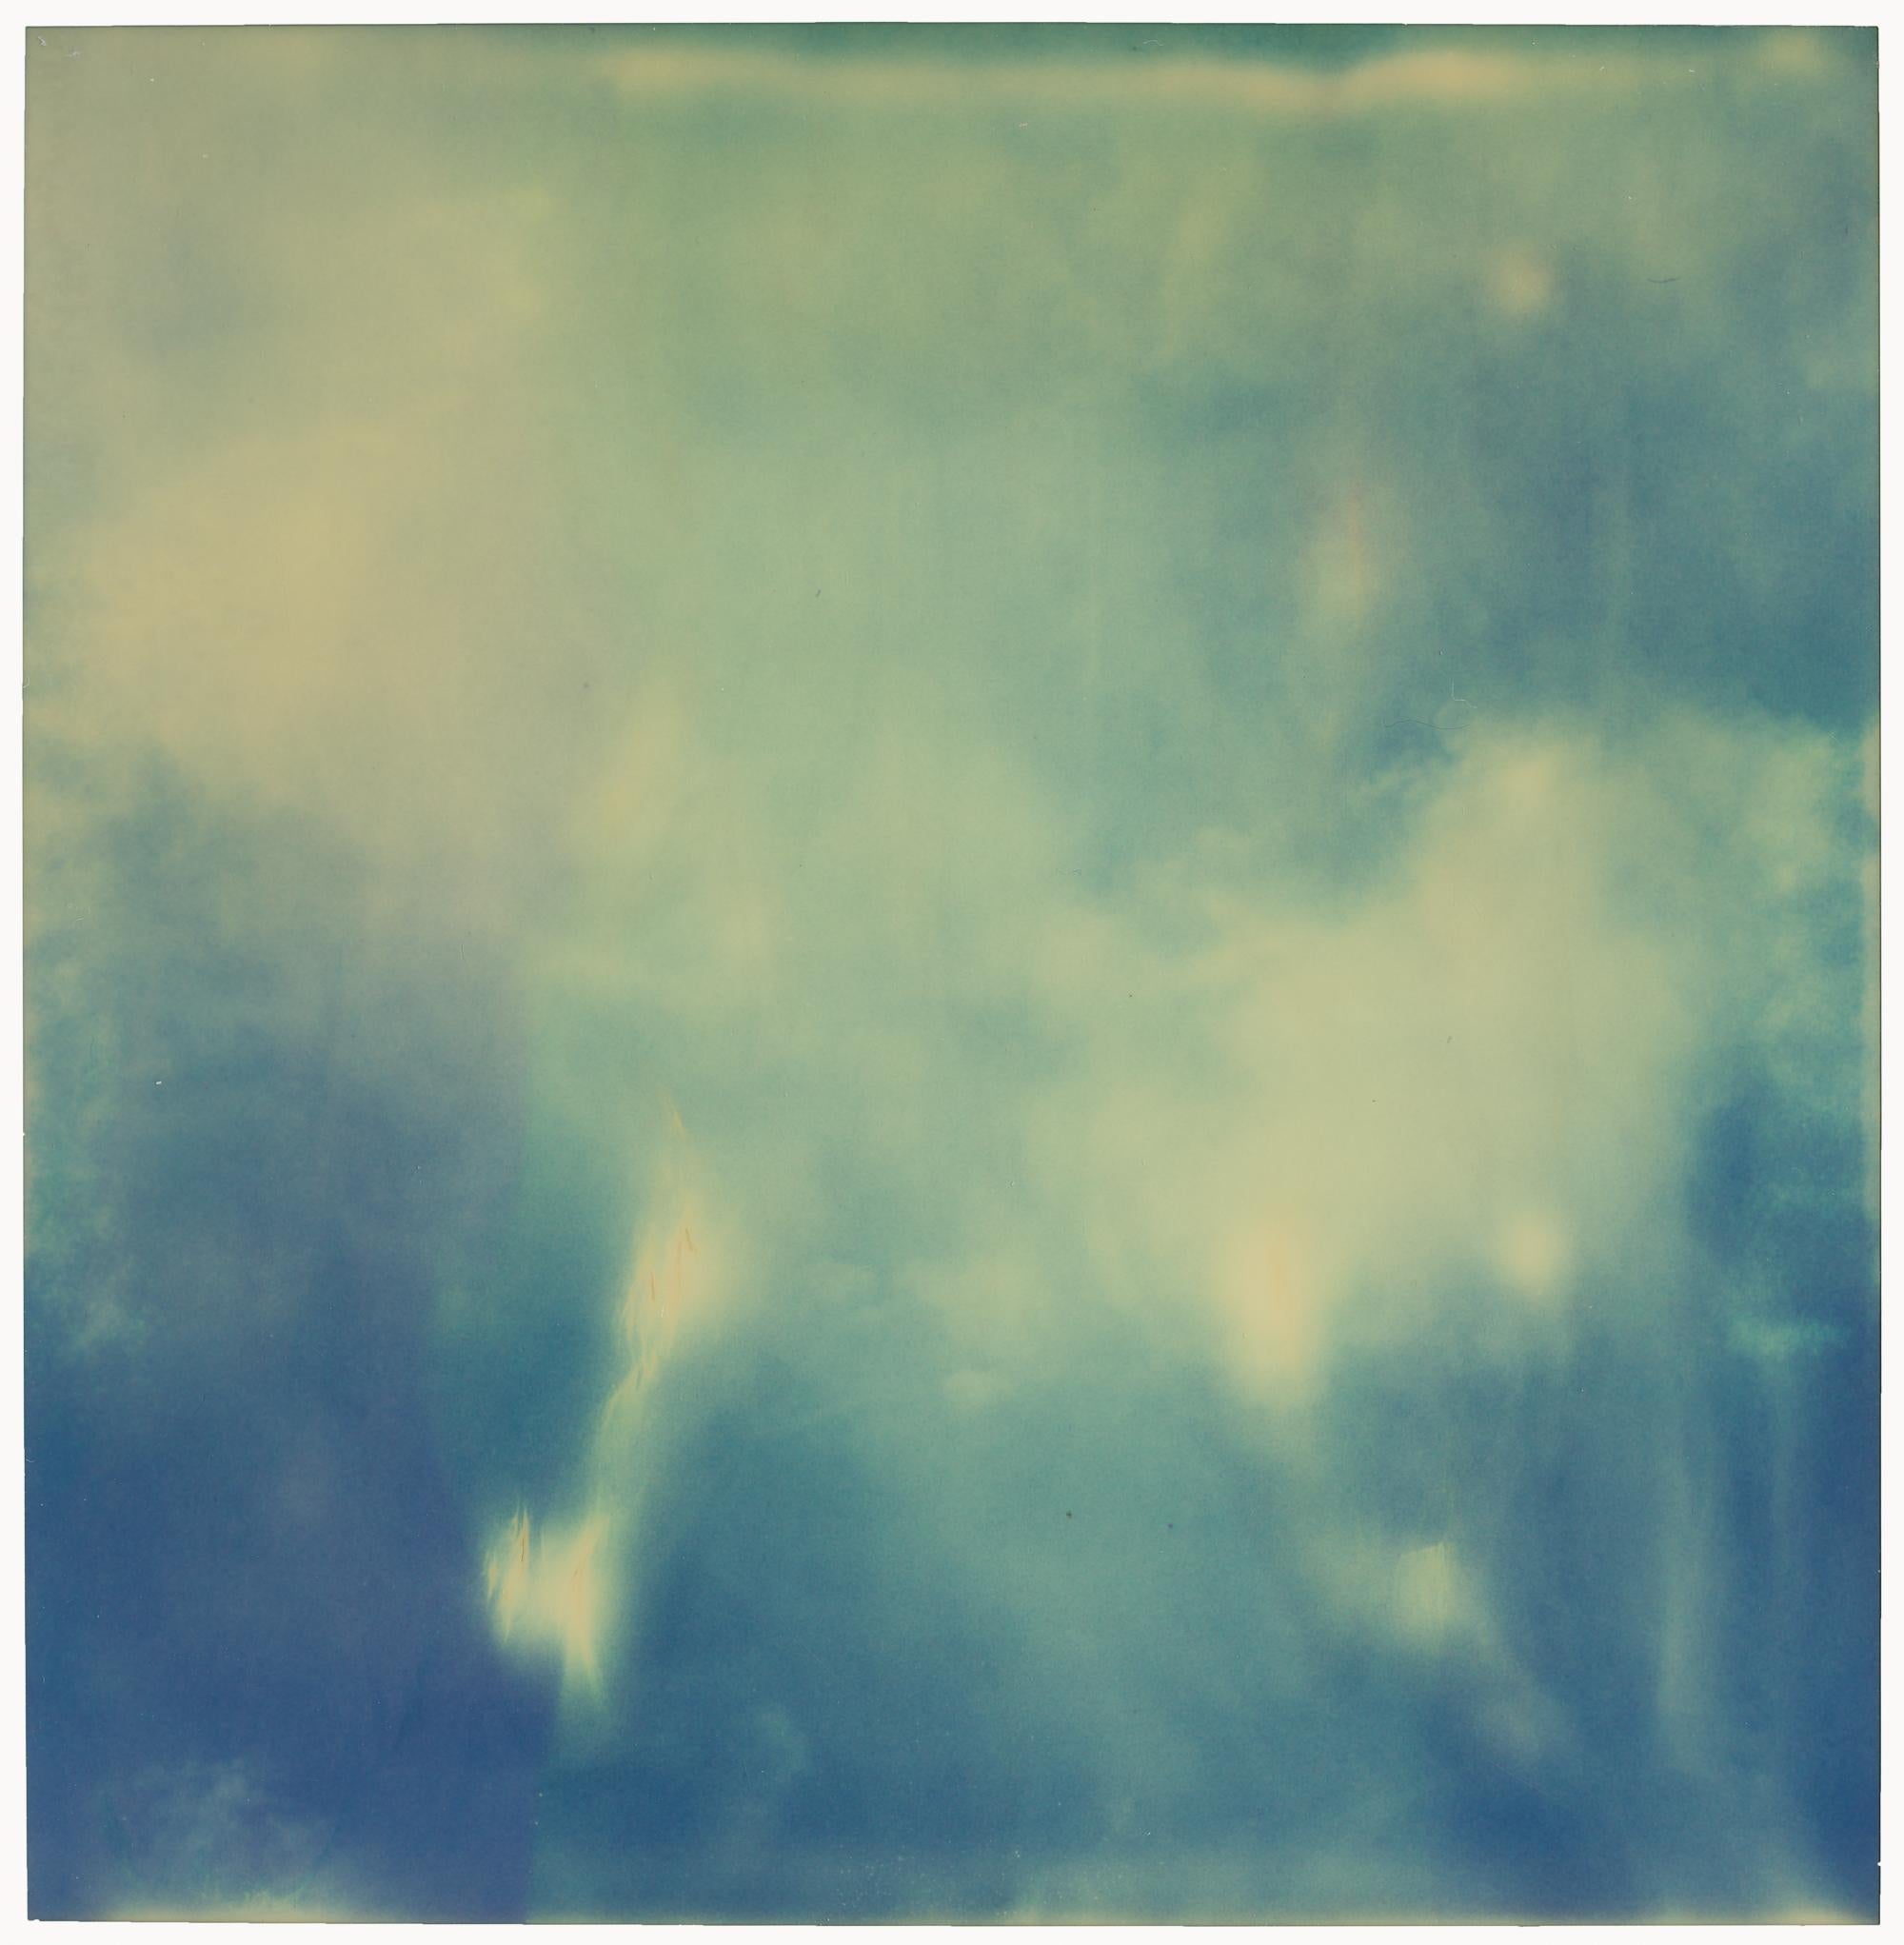 Blue Space Light - Planet of the Apes 07 - 21st Century, Polaroid, Abstract